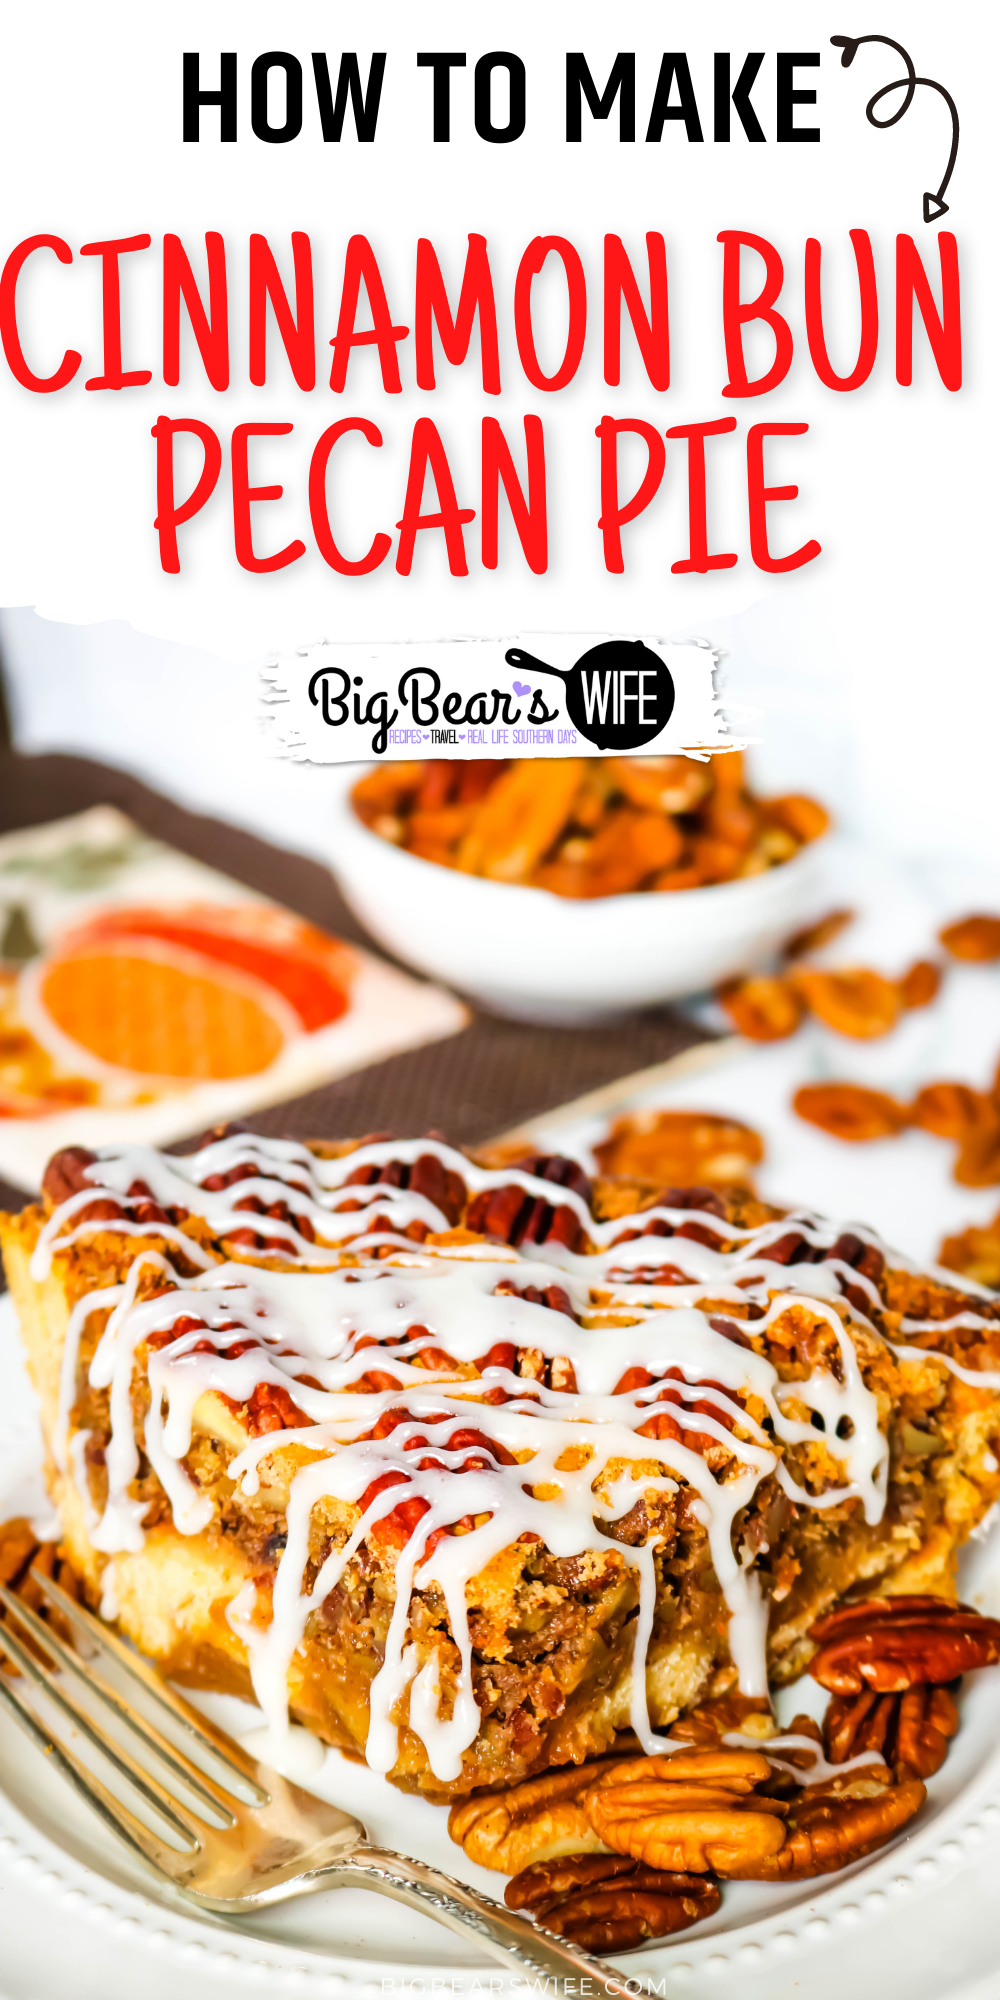 This Cinnamon Bun Pecan Pie has a cinnamon bun pie crust and an amazing and easy homemade pecan pie filling! Drizzle it with cream cheese frosting and you've got the perfect marriage of cinnamon buns and pecan pie! via @bigbearswife